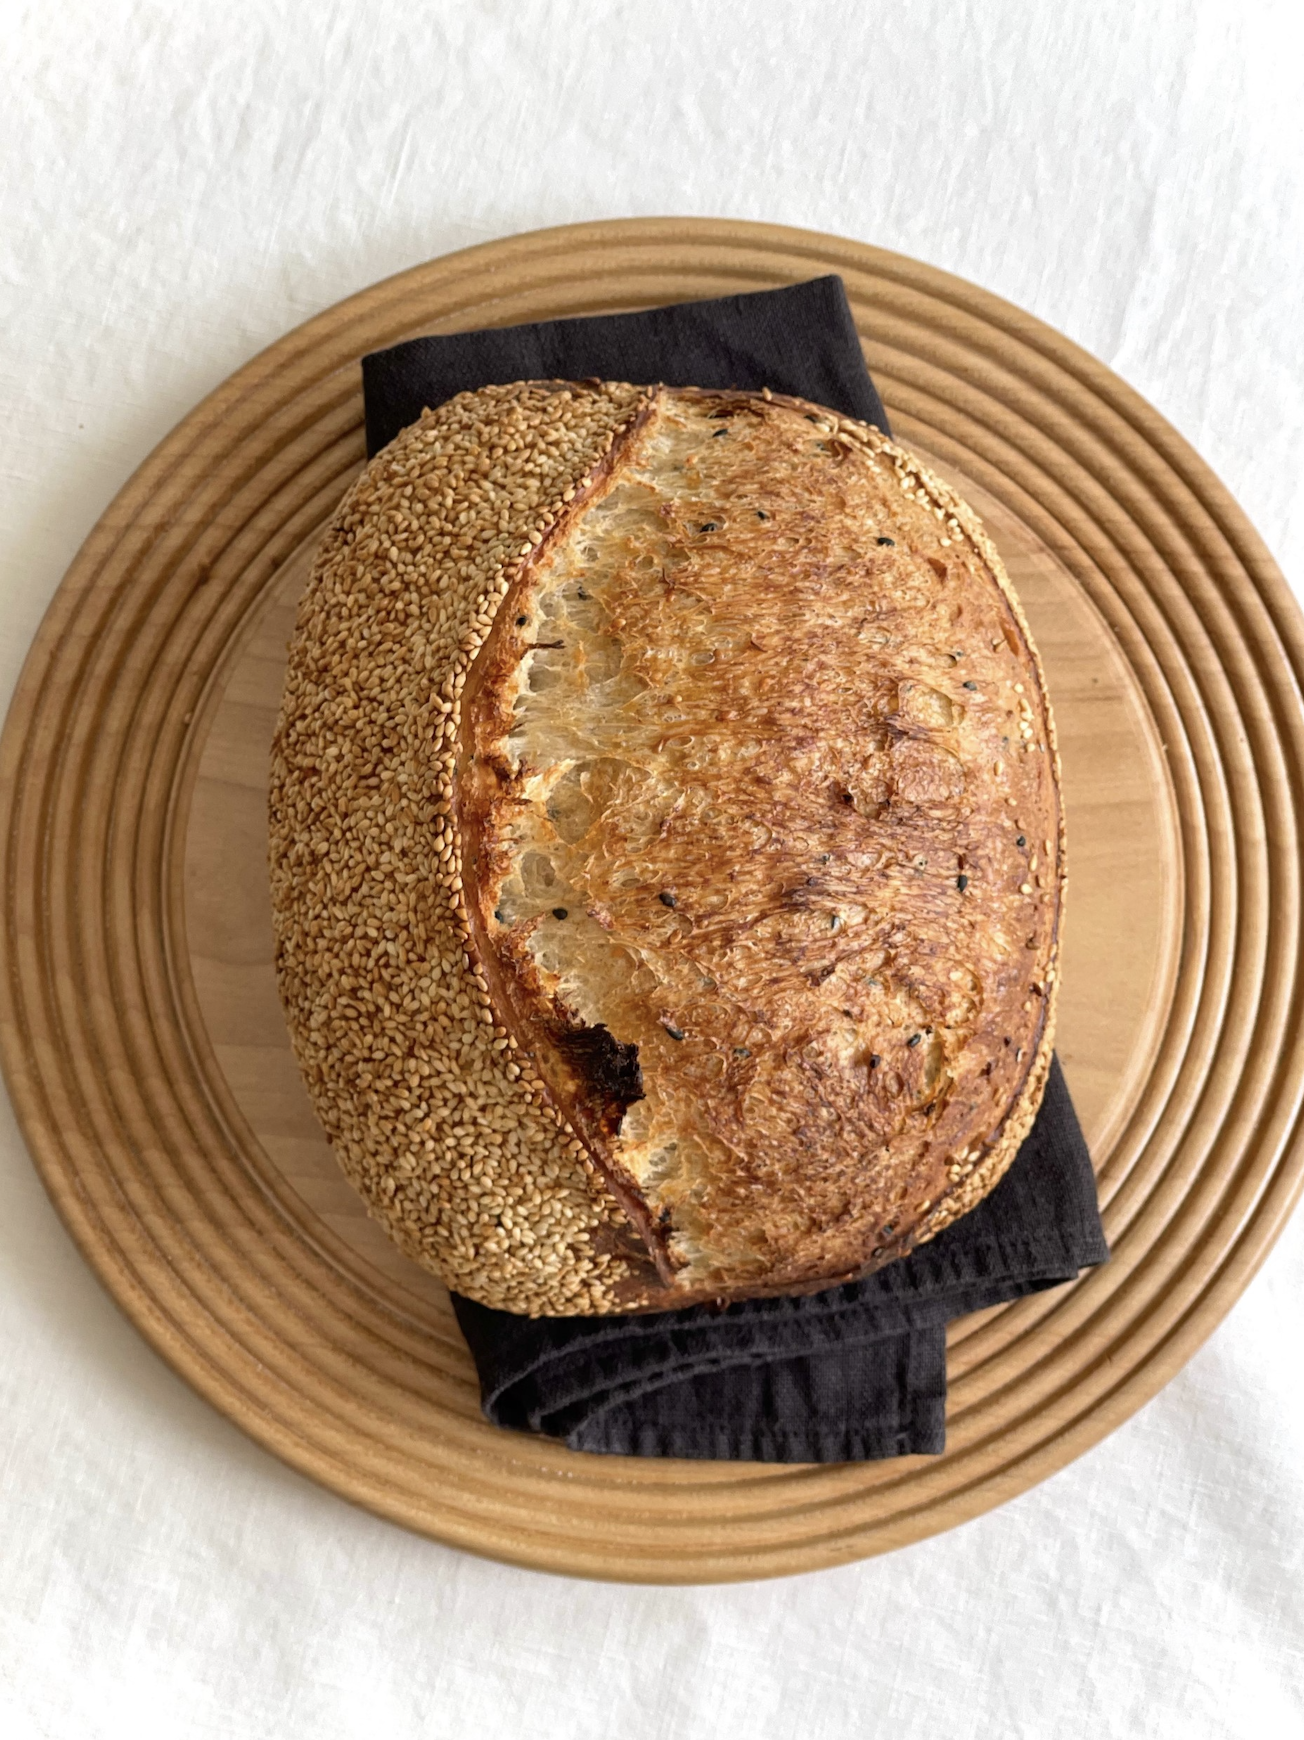 sourdough bread influencer home baker classes teaching recipes trouble shooting help support in England United Kingdom from Marie Lester of @MarieLesterBaker on Instagram 22